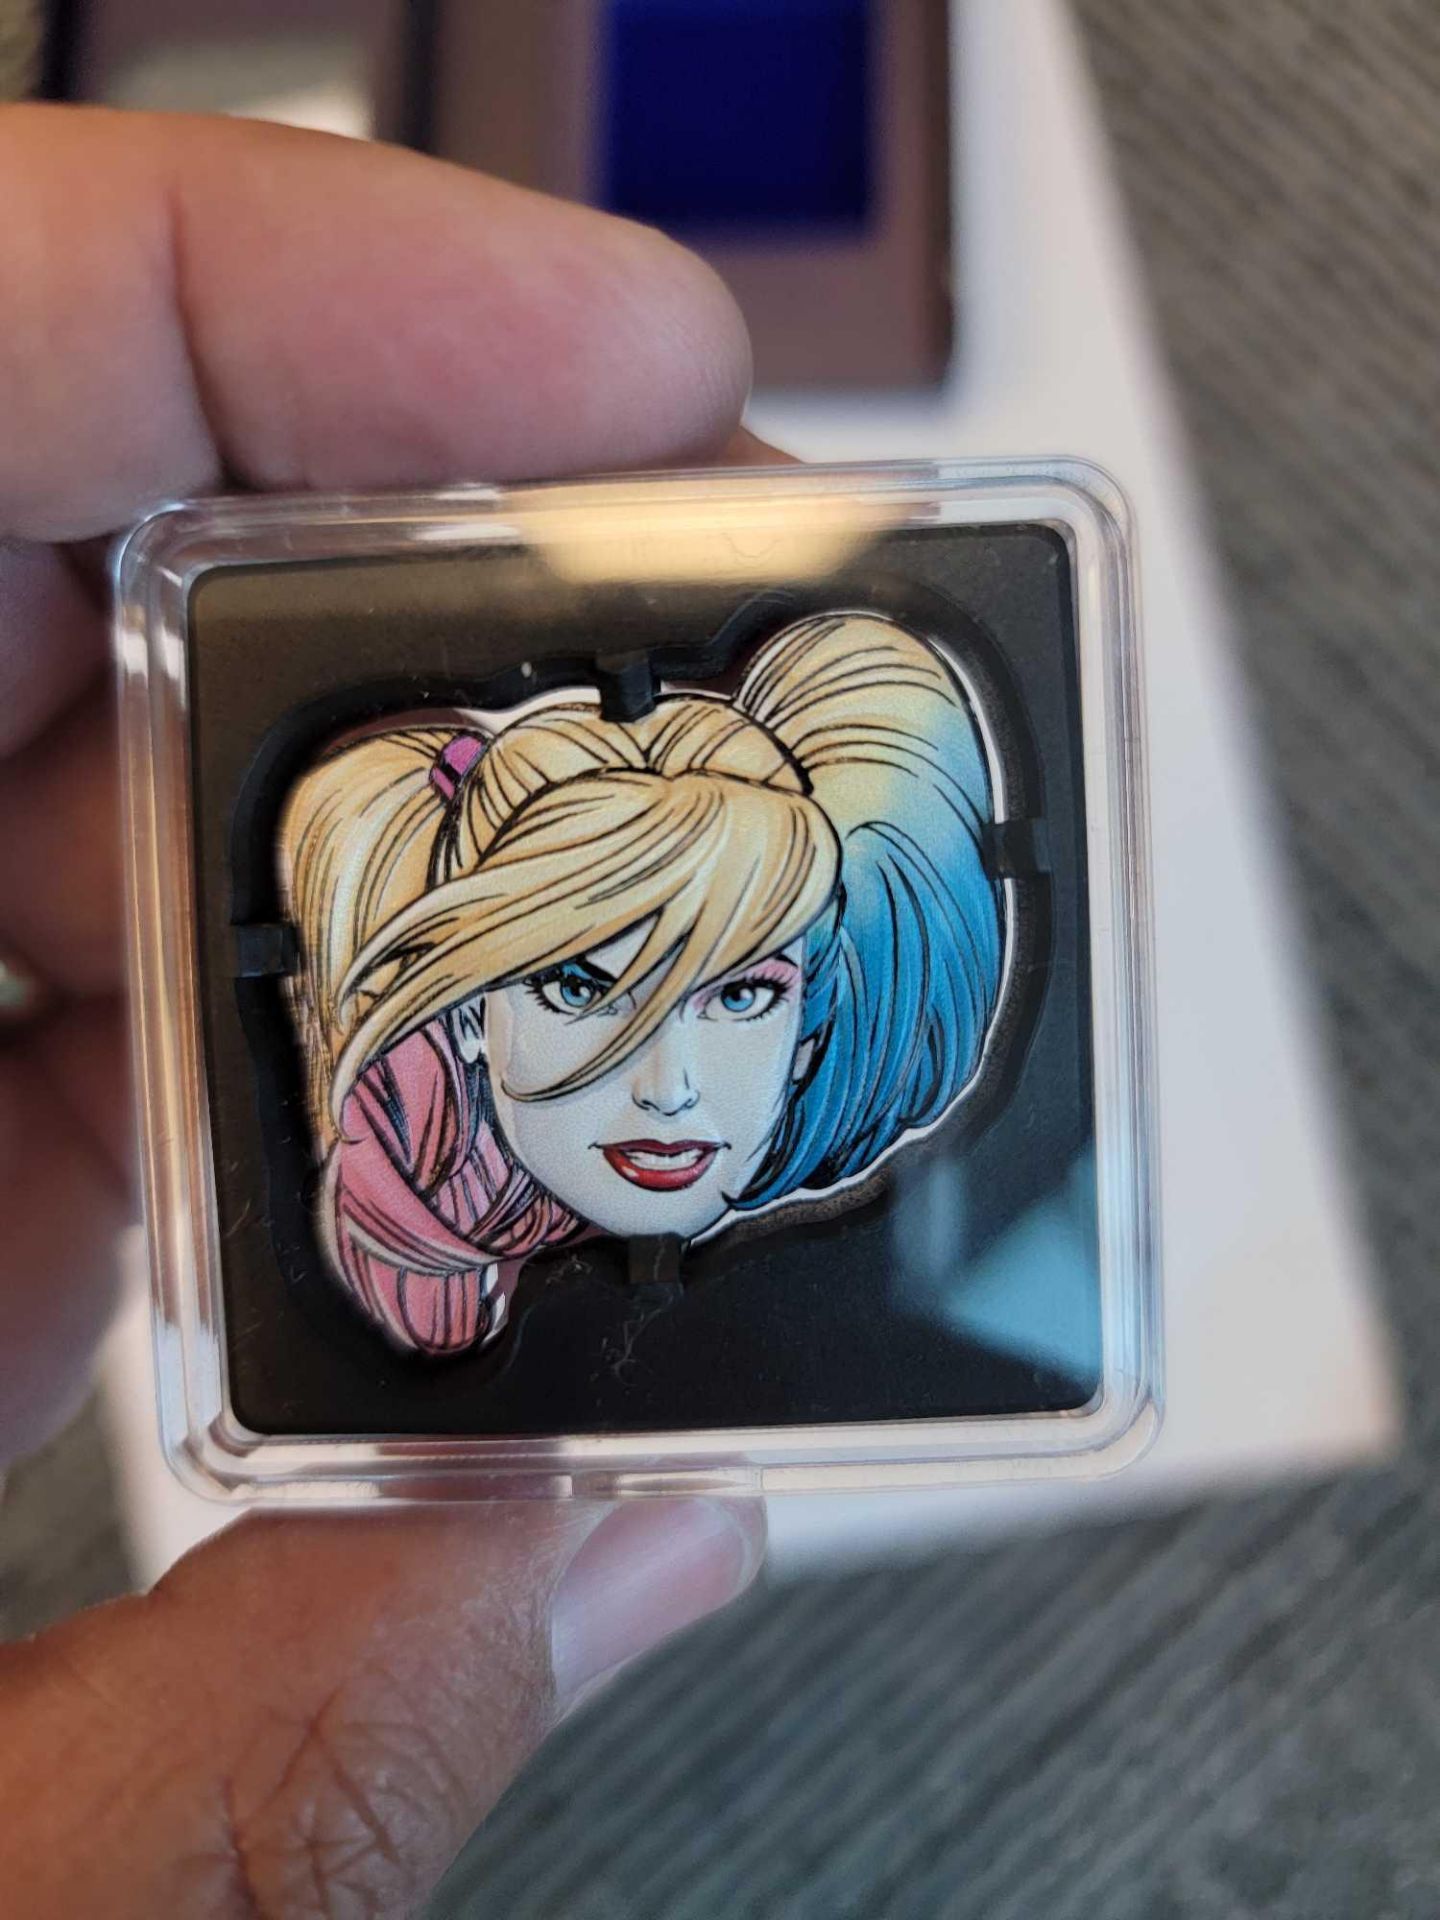 Faces of Gotham - Harley Quinn 1 oz Silver Collectible Coin - Image 8 of 12